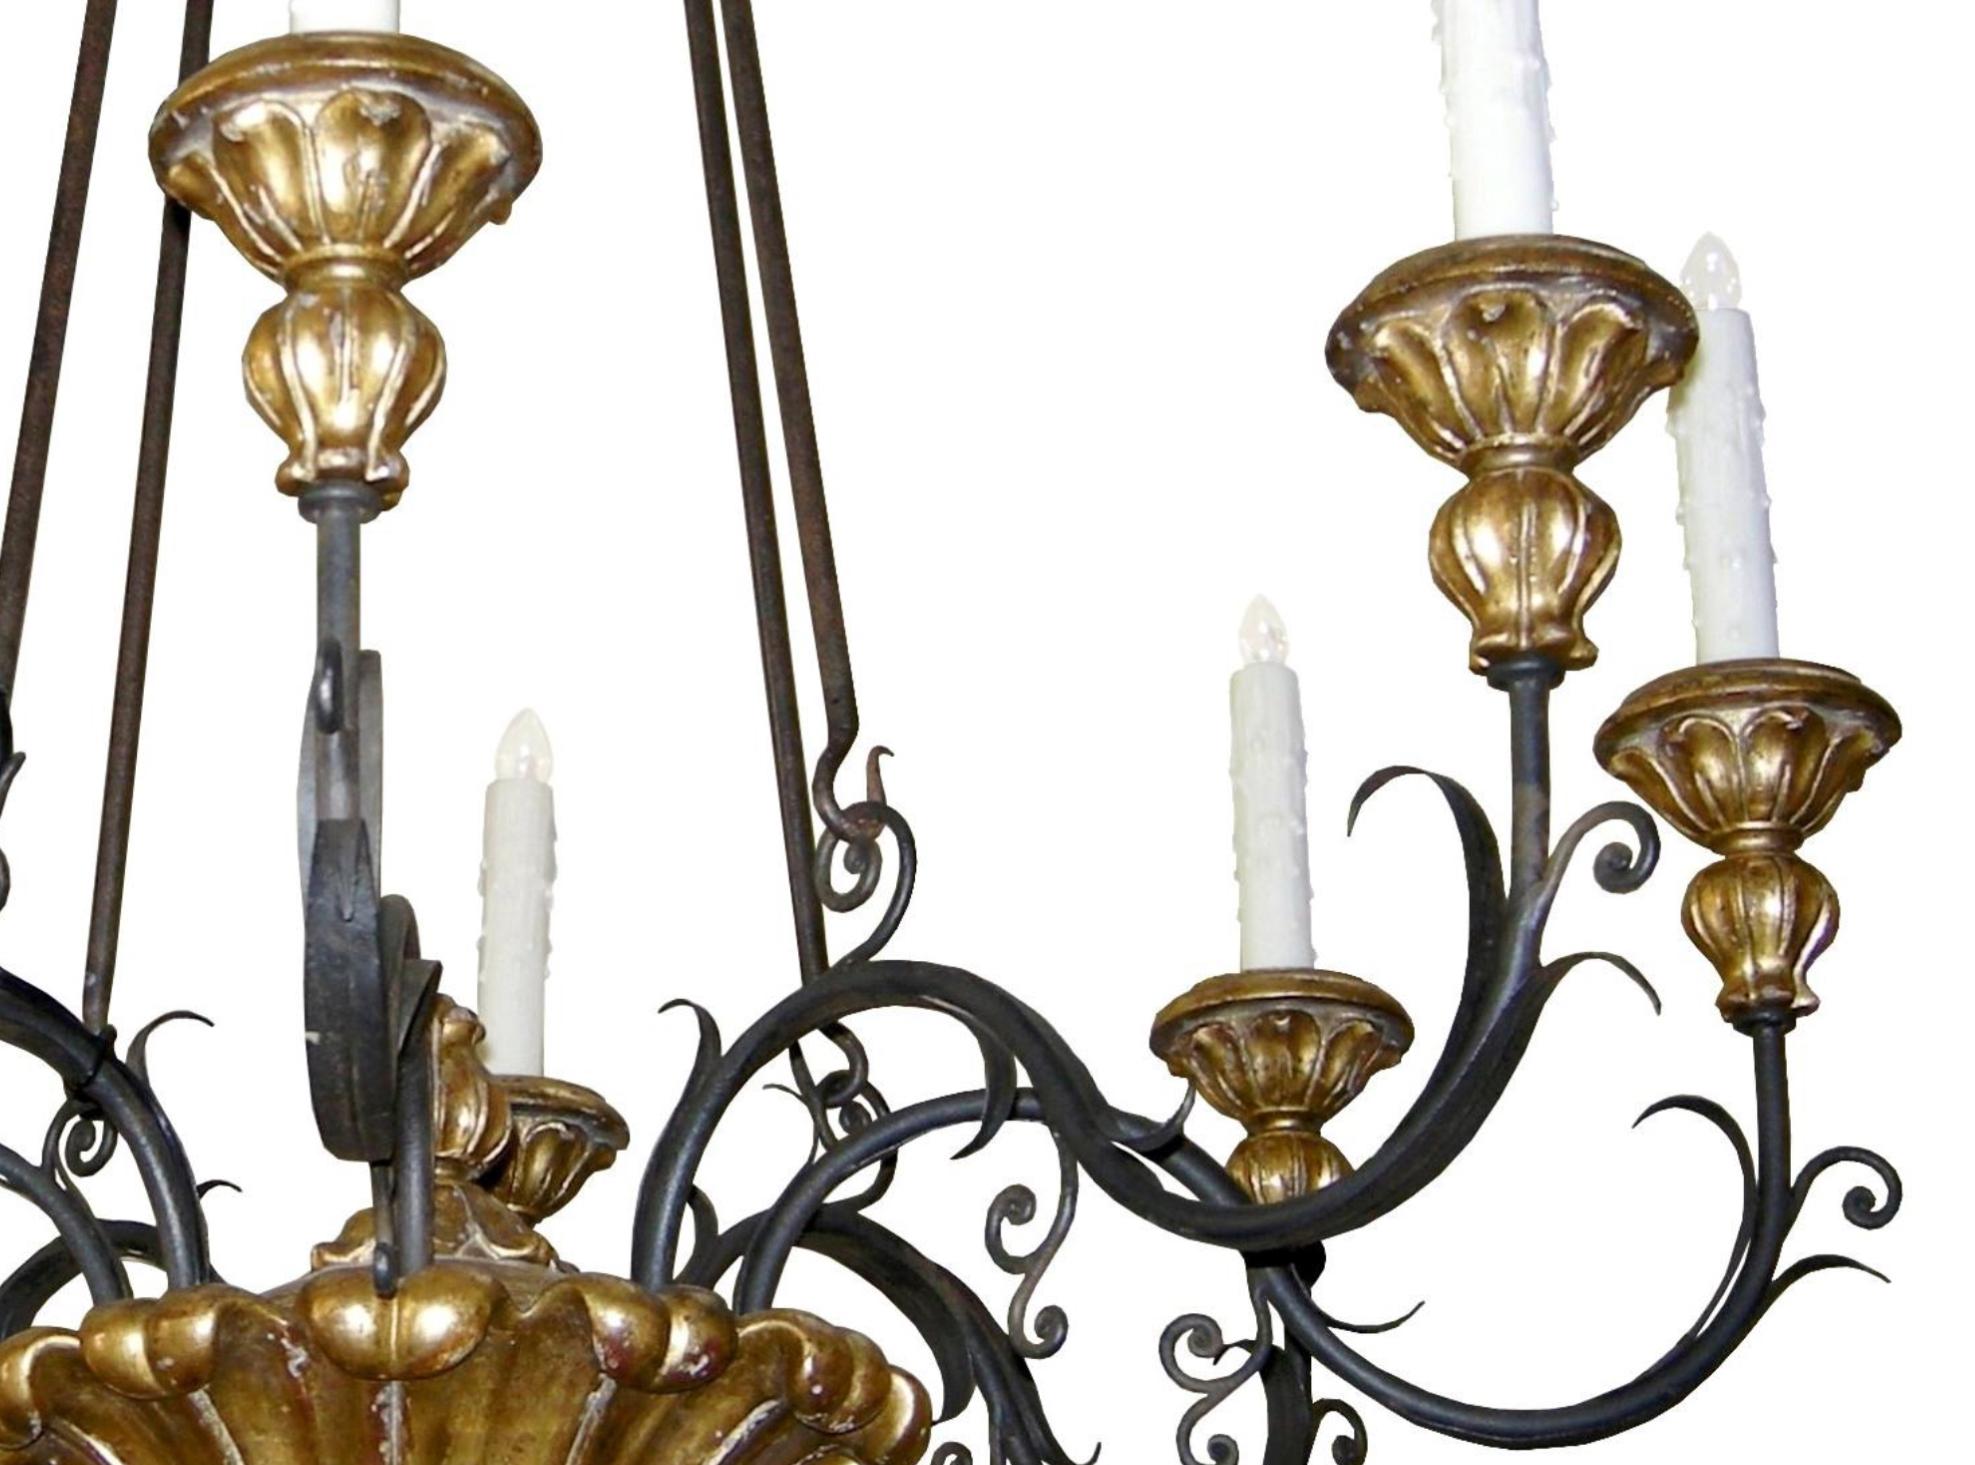 Veneto Italian Designer Eight Arm Gilt-wood & Wrought Iron Chandelier by Randy Esada

Item #: 9024E - Veneto Chandelier (8-Arm)
Note: This chandelier canopy shown mounts directly to ceiling, if need longer drop, inquire about transition modification